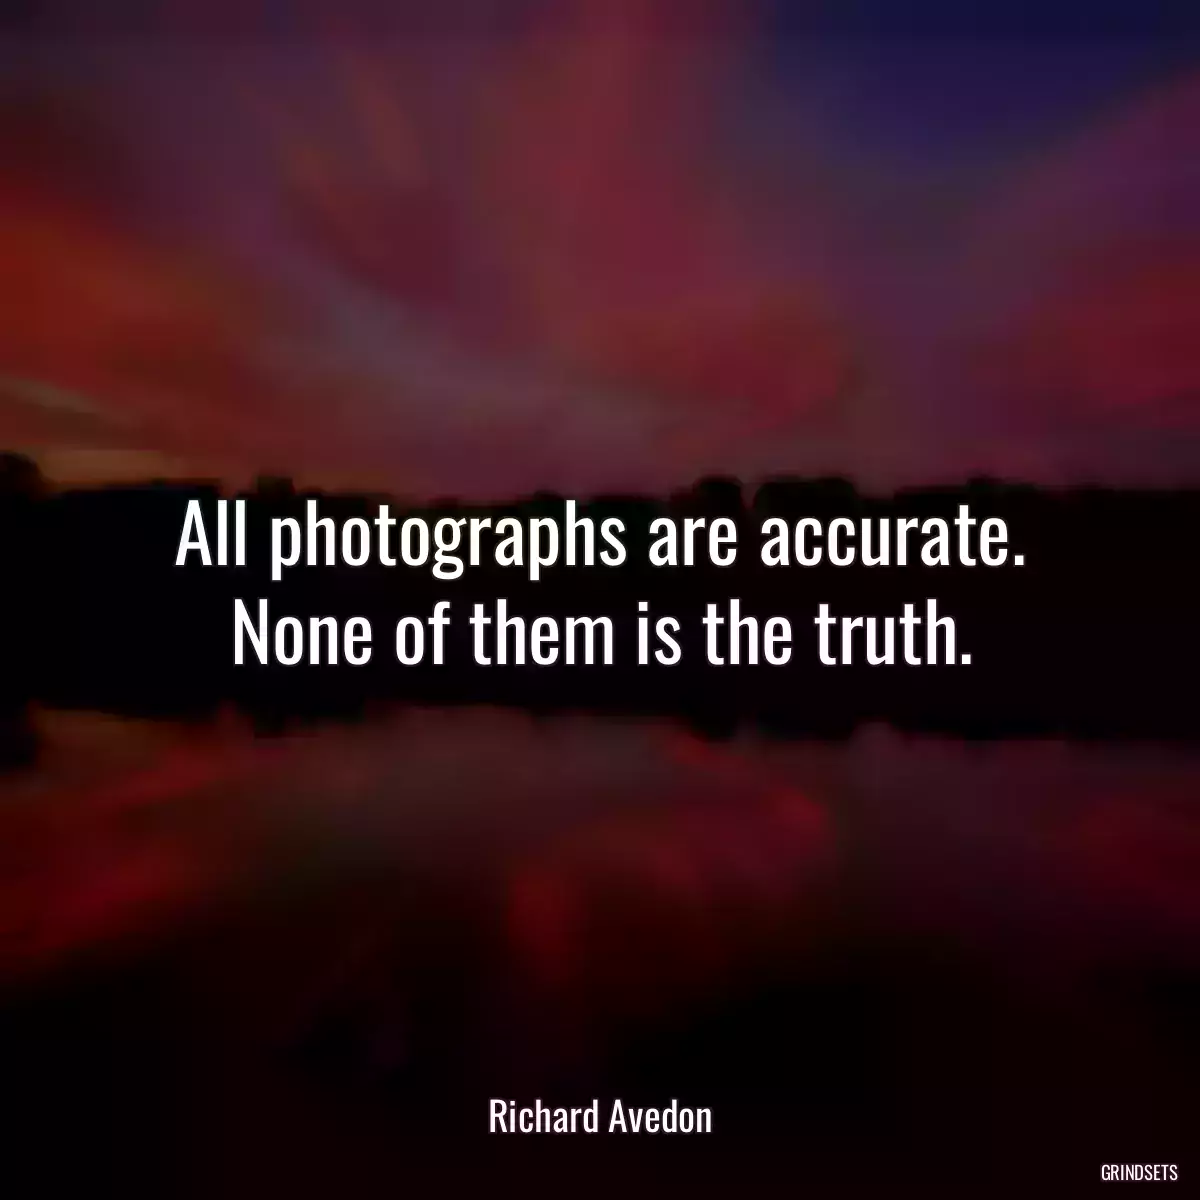 All photographs are accurate. None of them is the truth.